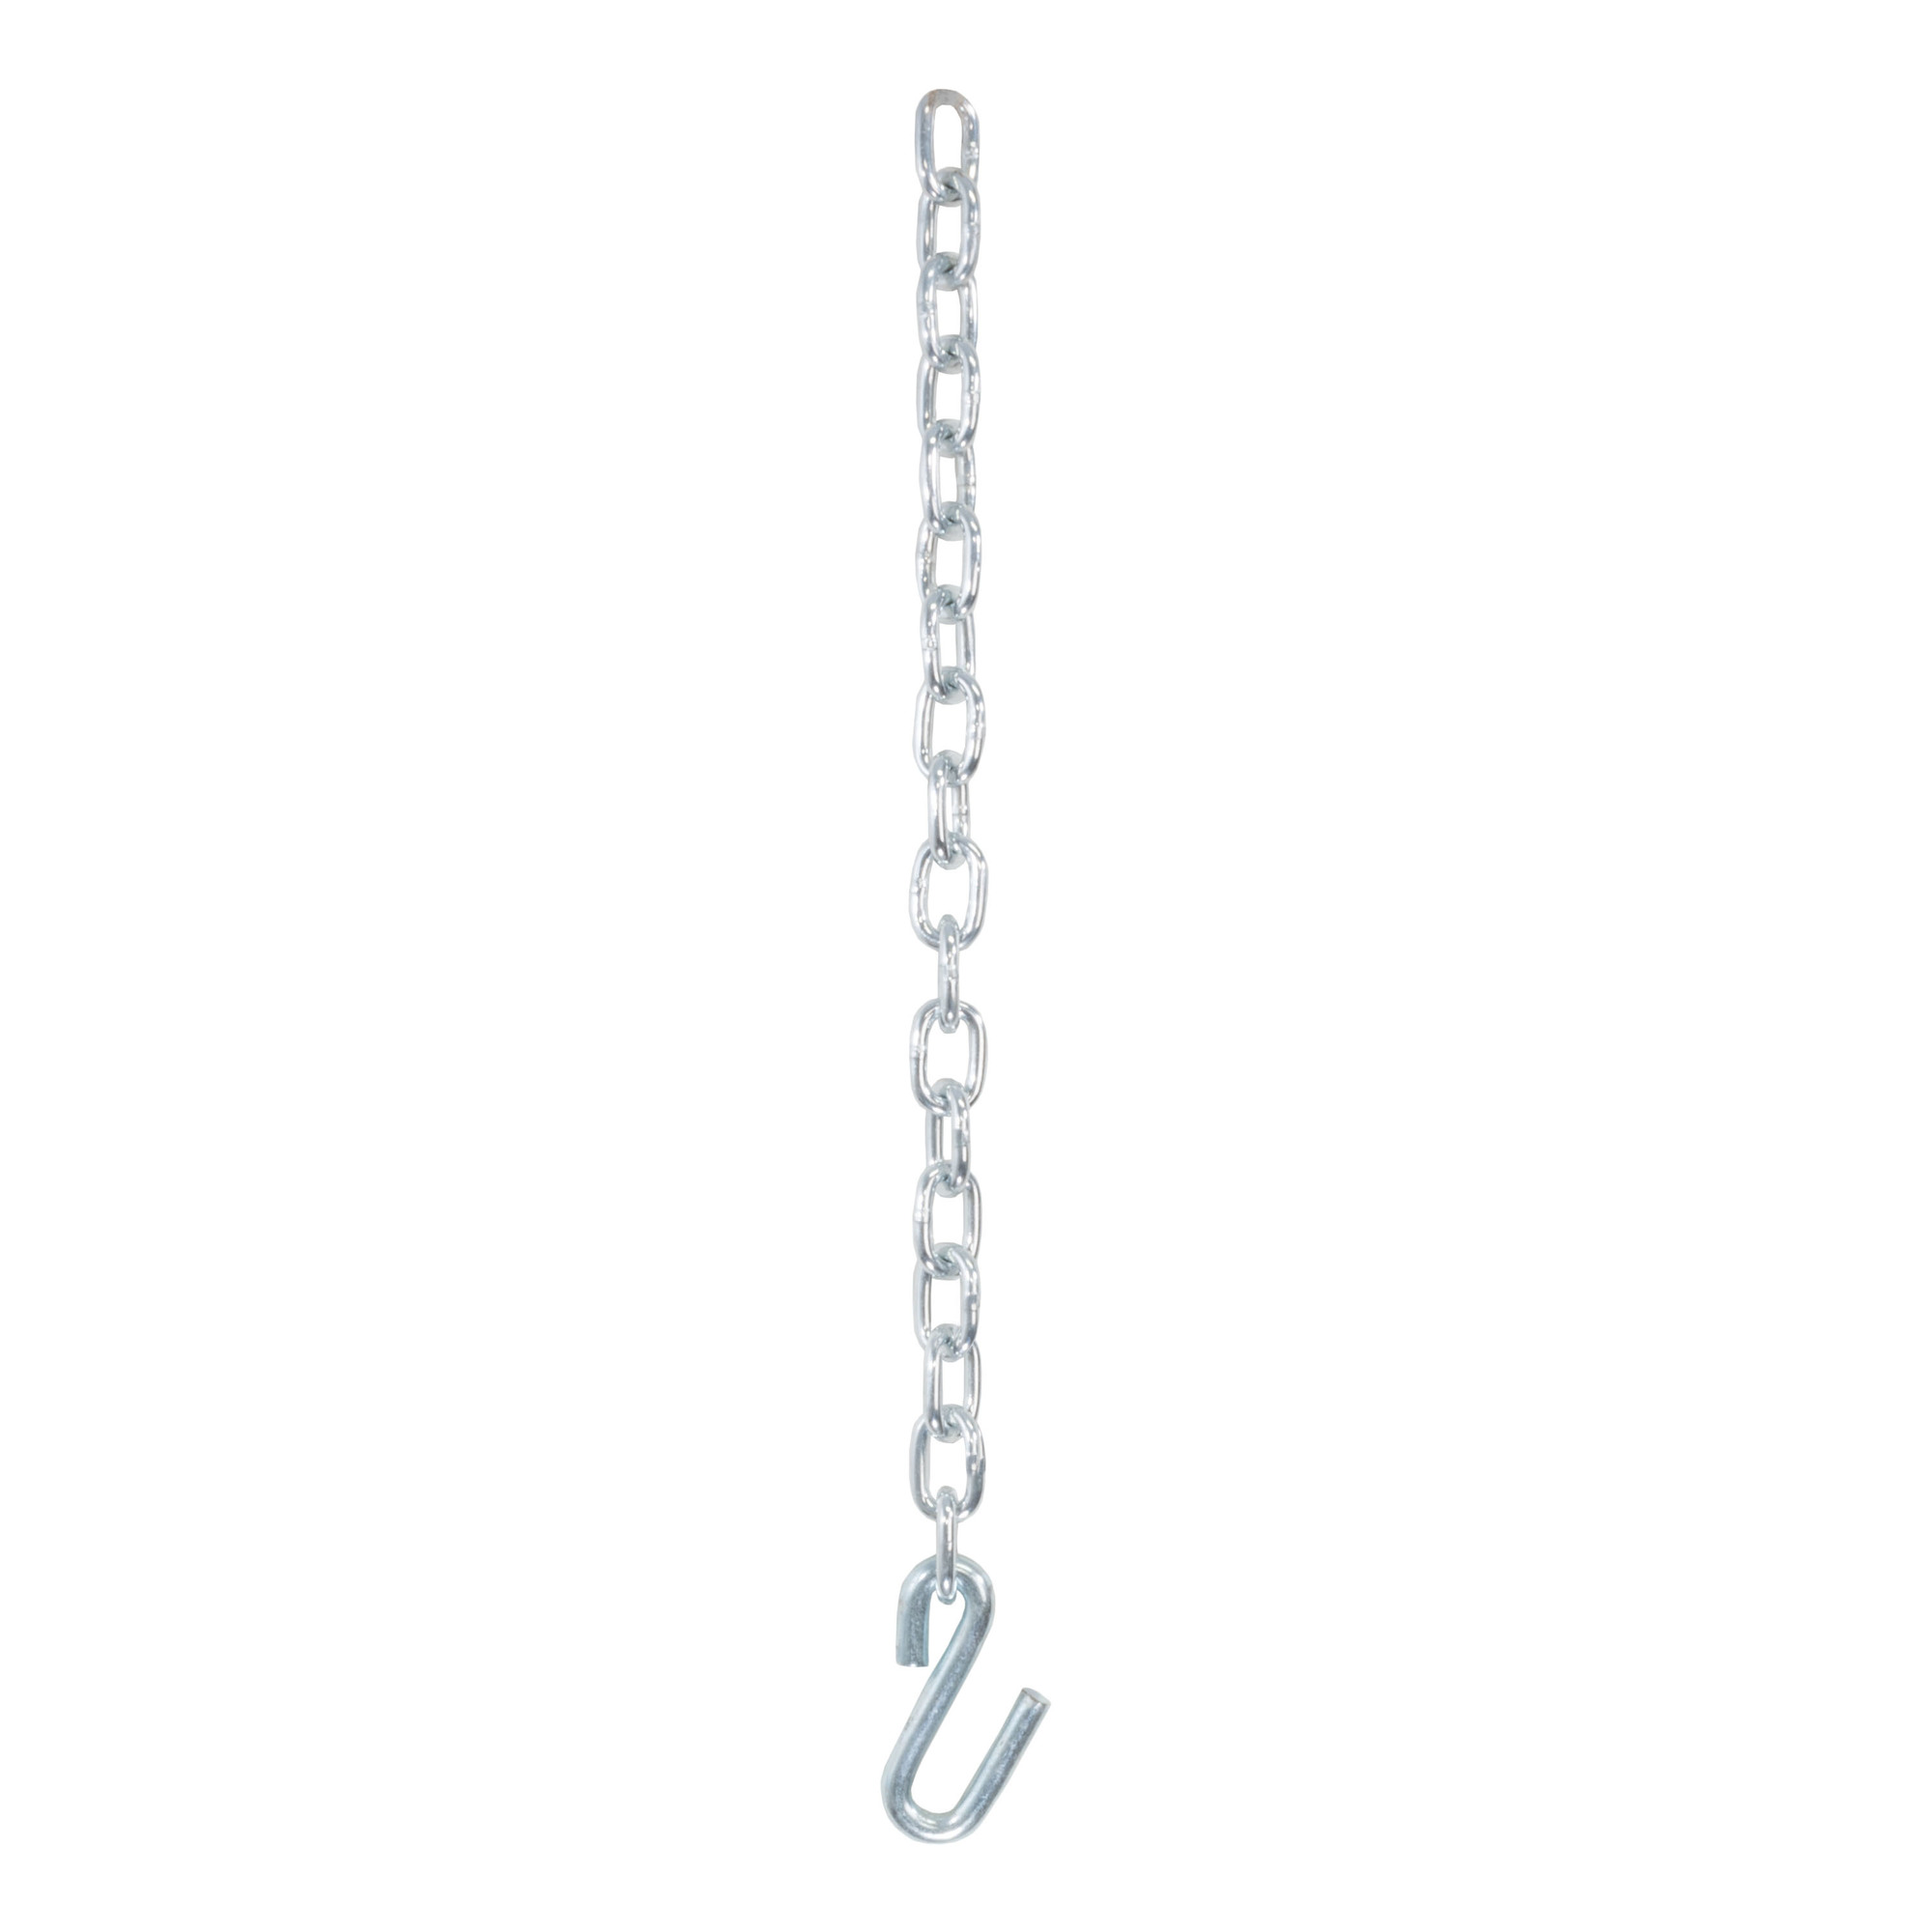 Curt Manufacturing, 27Inch Safety Chain with 1 S-Hook, Length 27 in, Material Steel, Model 80300